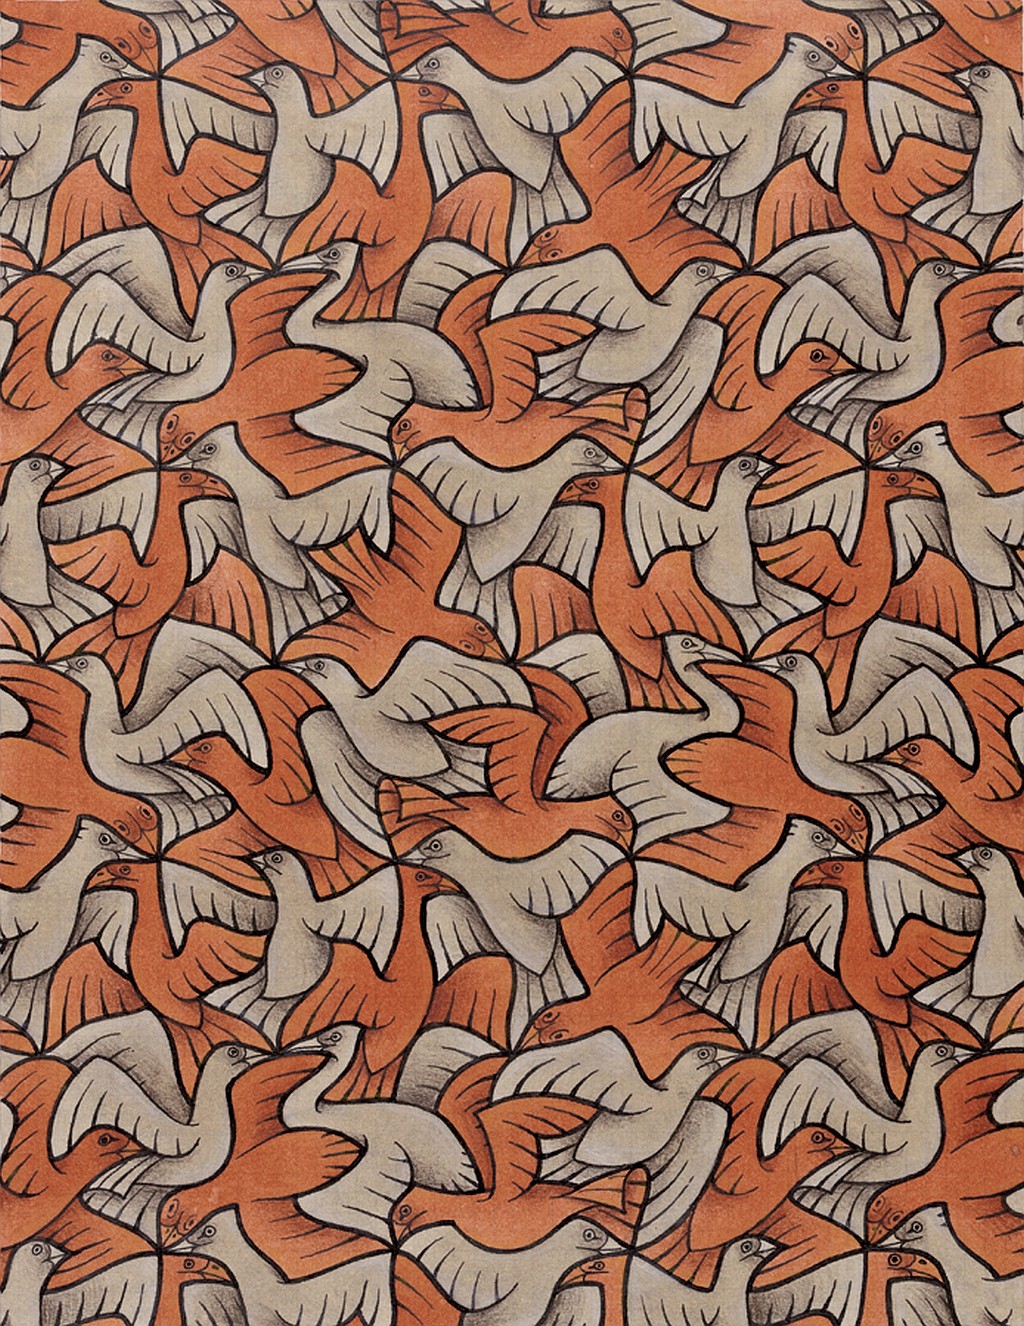 drawing, Artwork, M. C. Escher, Optical Illusion, Symmetry, Sketches, Animals, Birds, Red, Flying, Wings Wallpaper